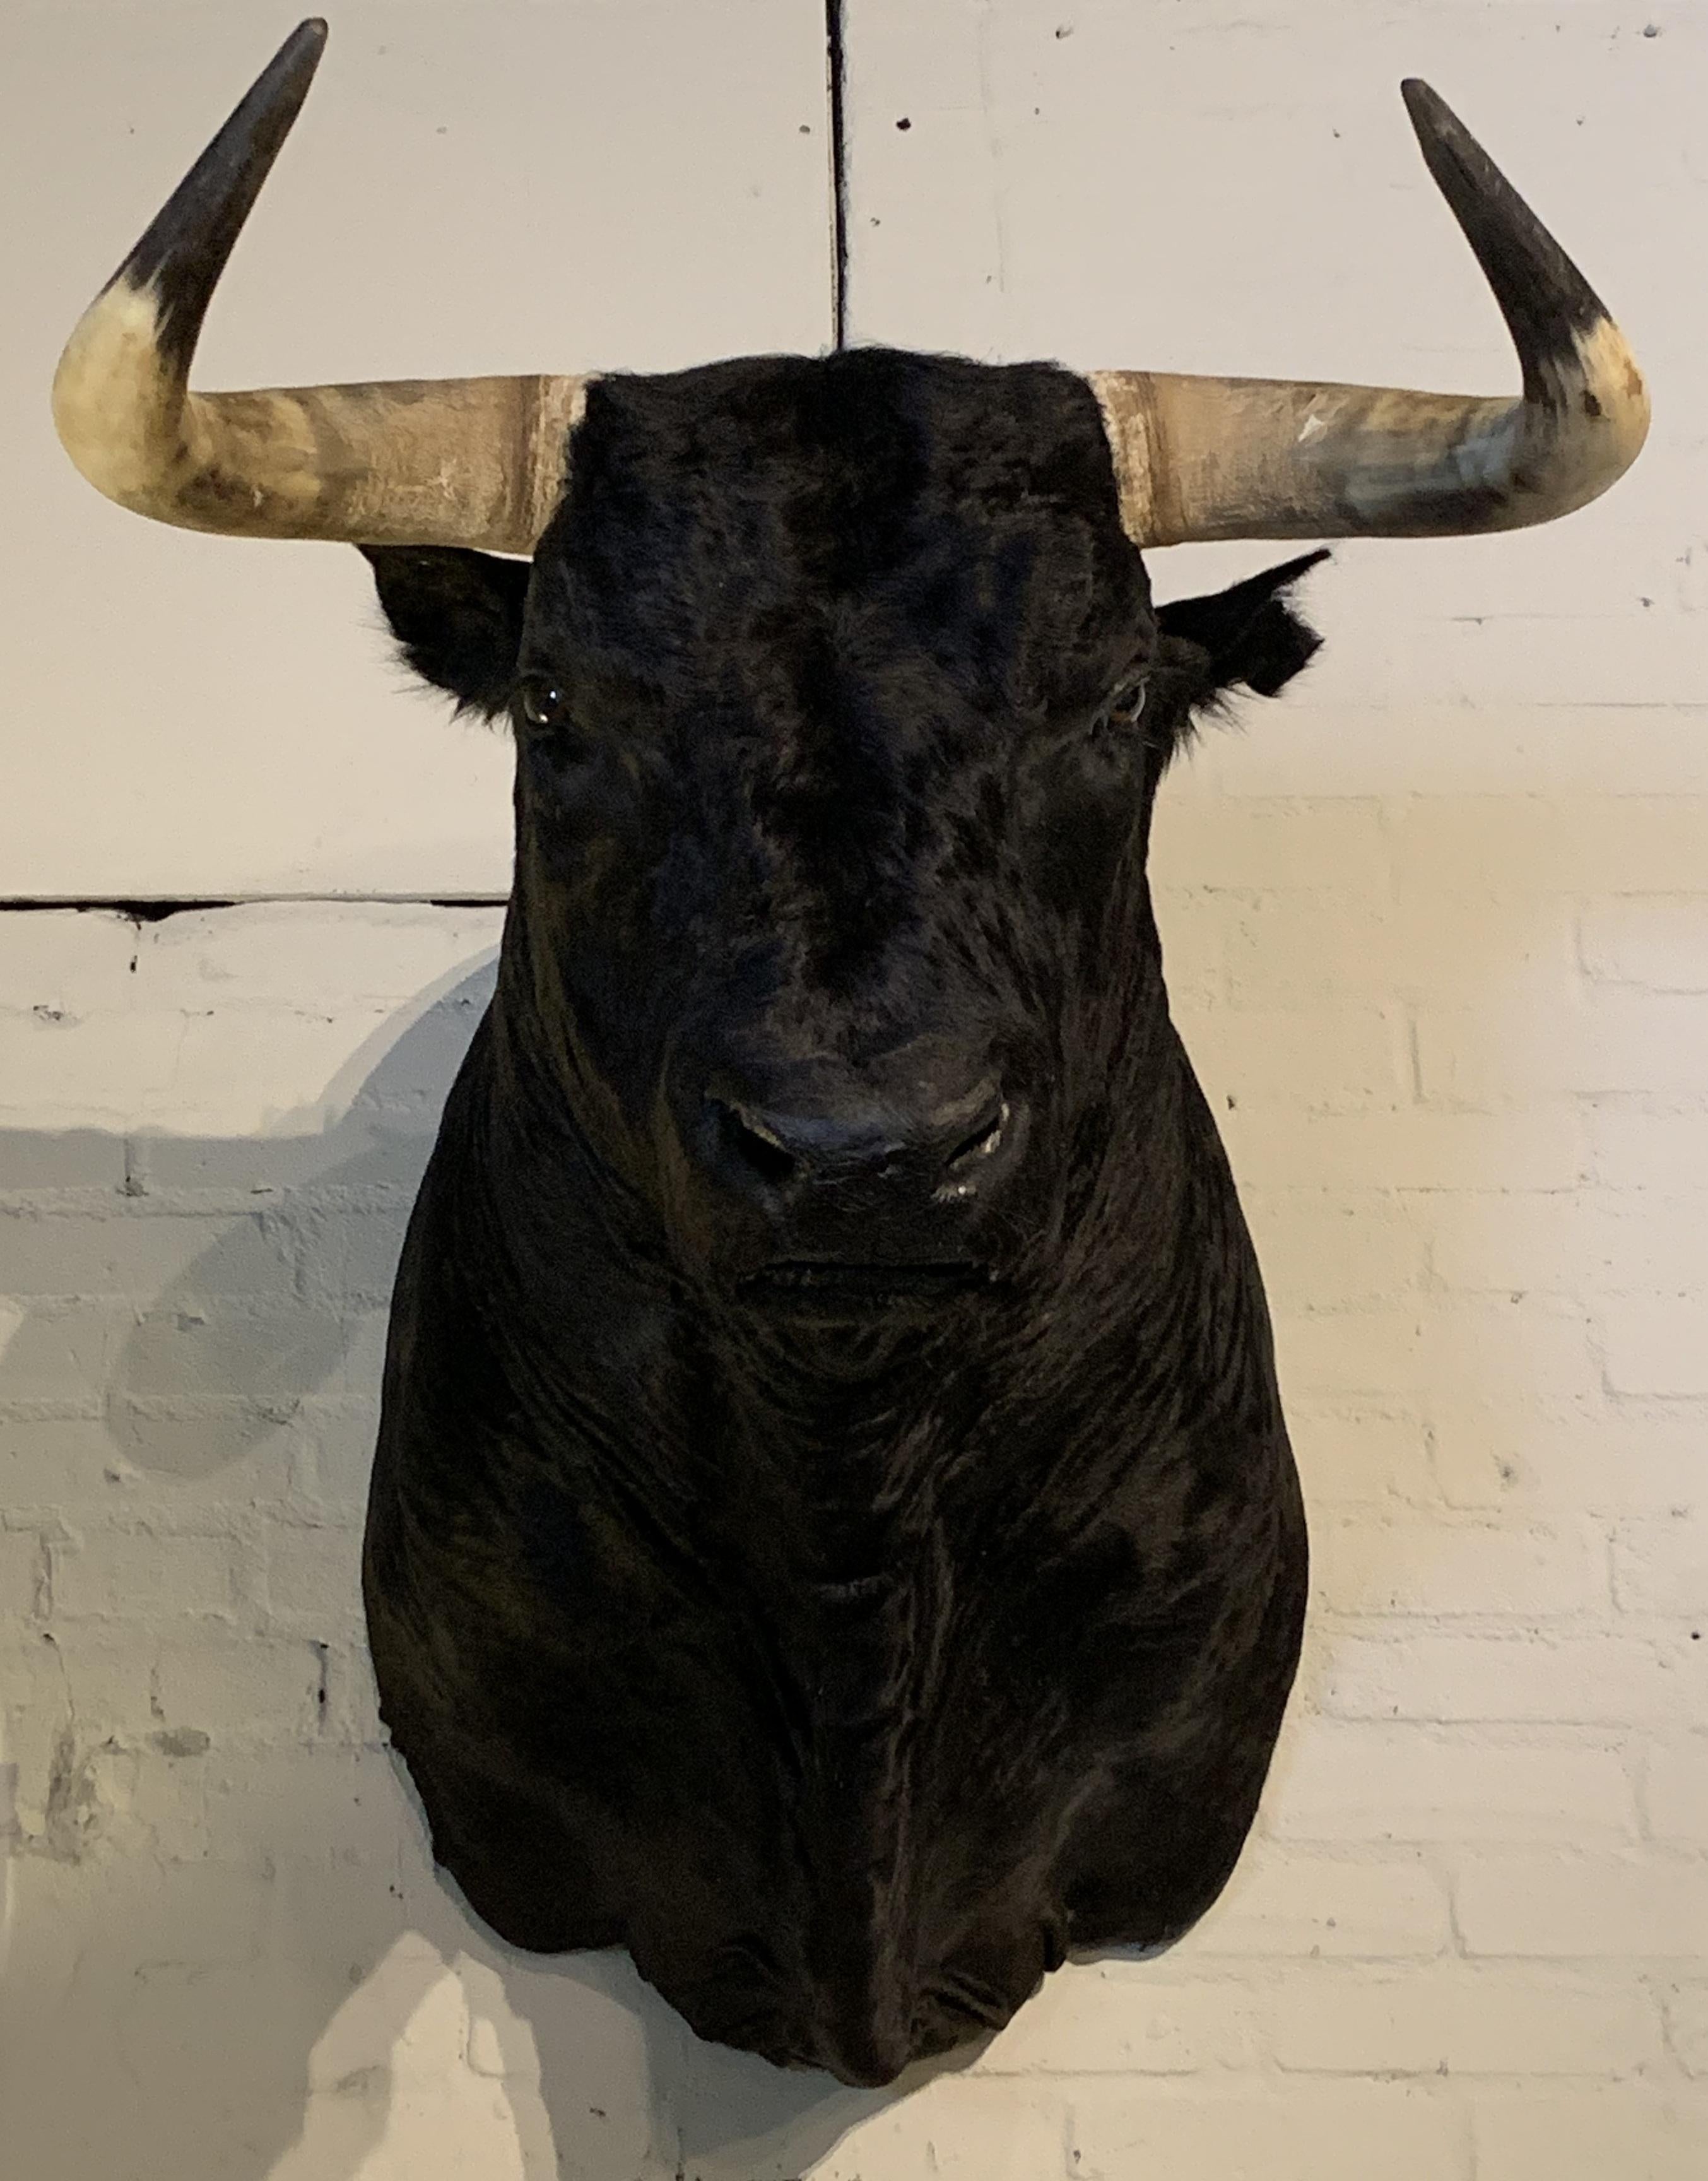 Exclusive taxidermy head of a Spanish fighting bull.
The head is made very lifelike. A real masterpiece of taxidermy.